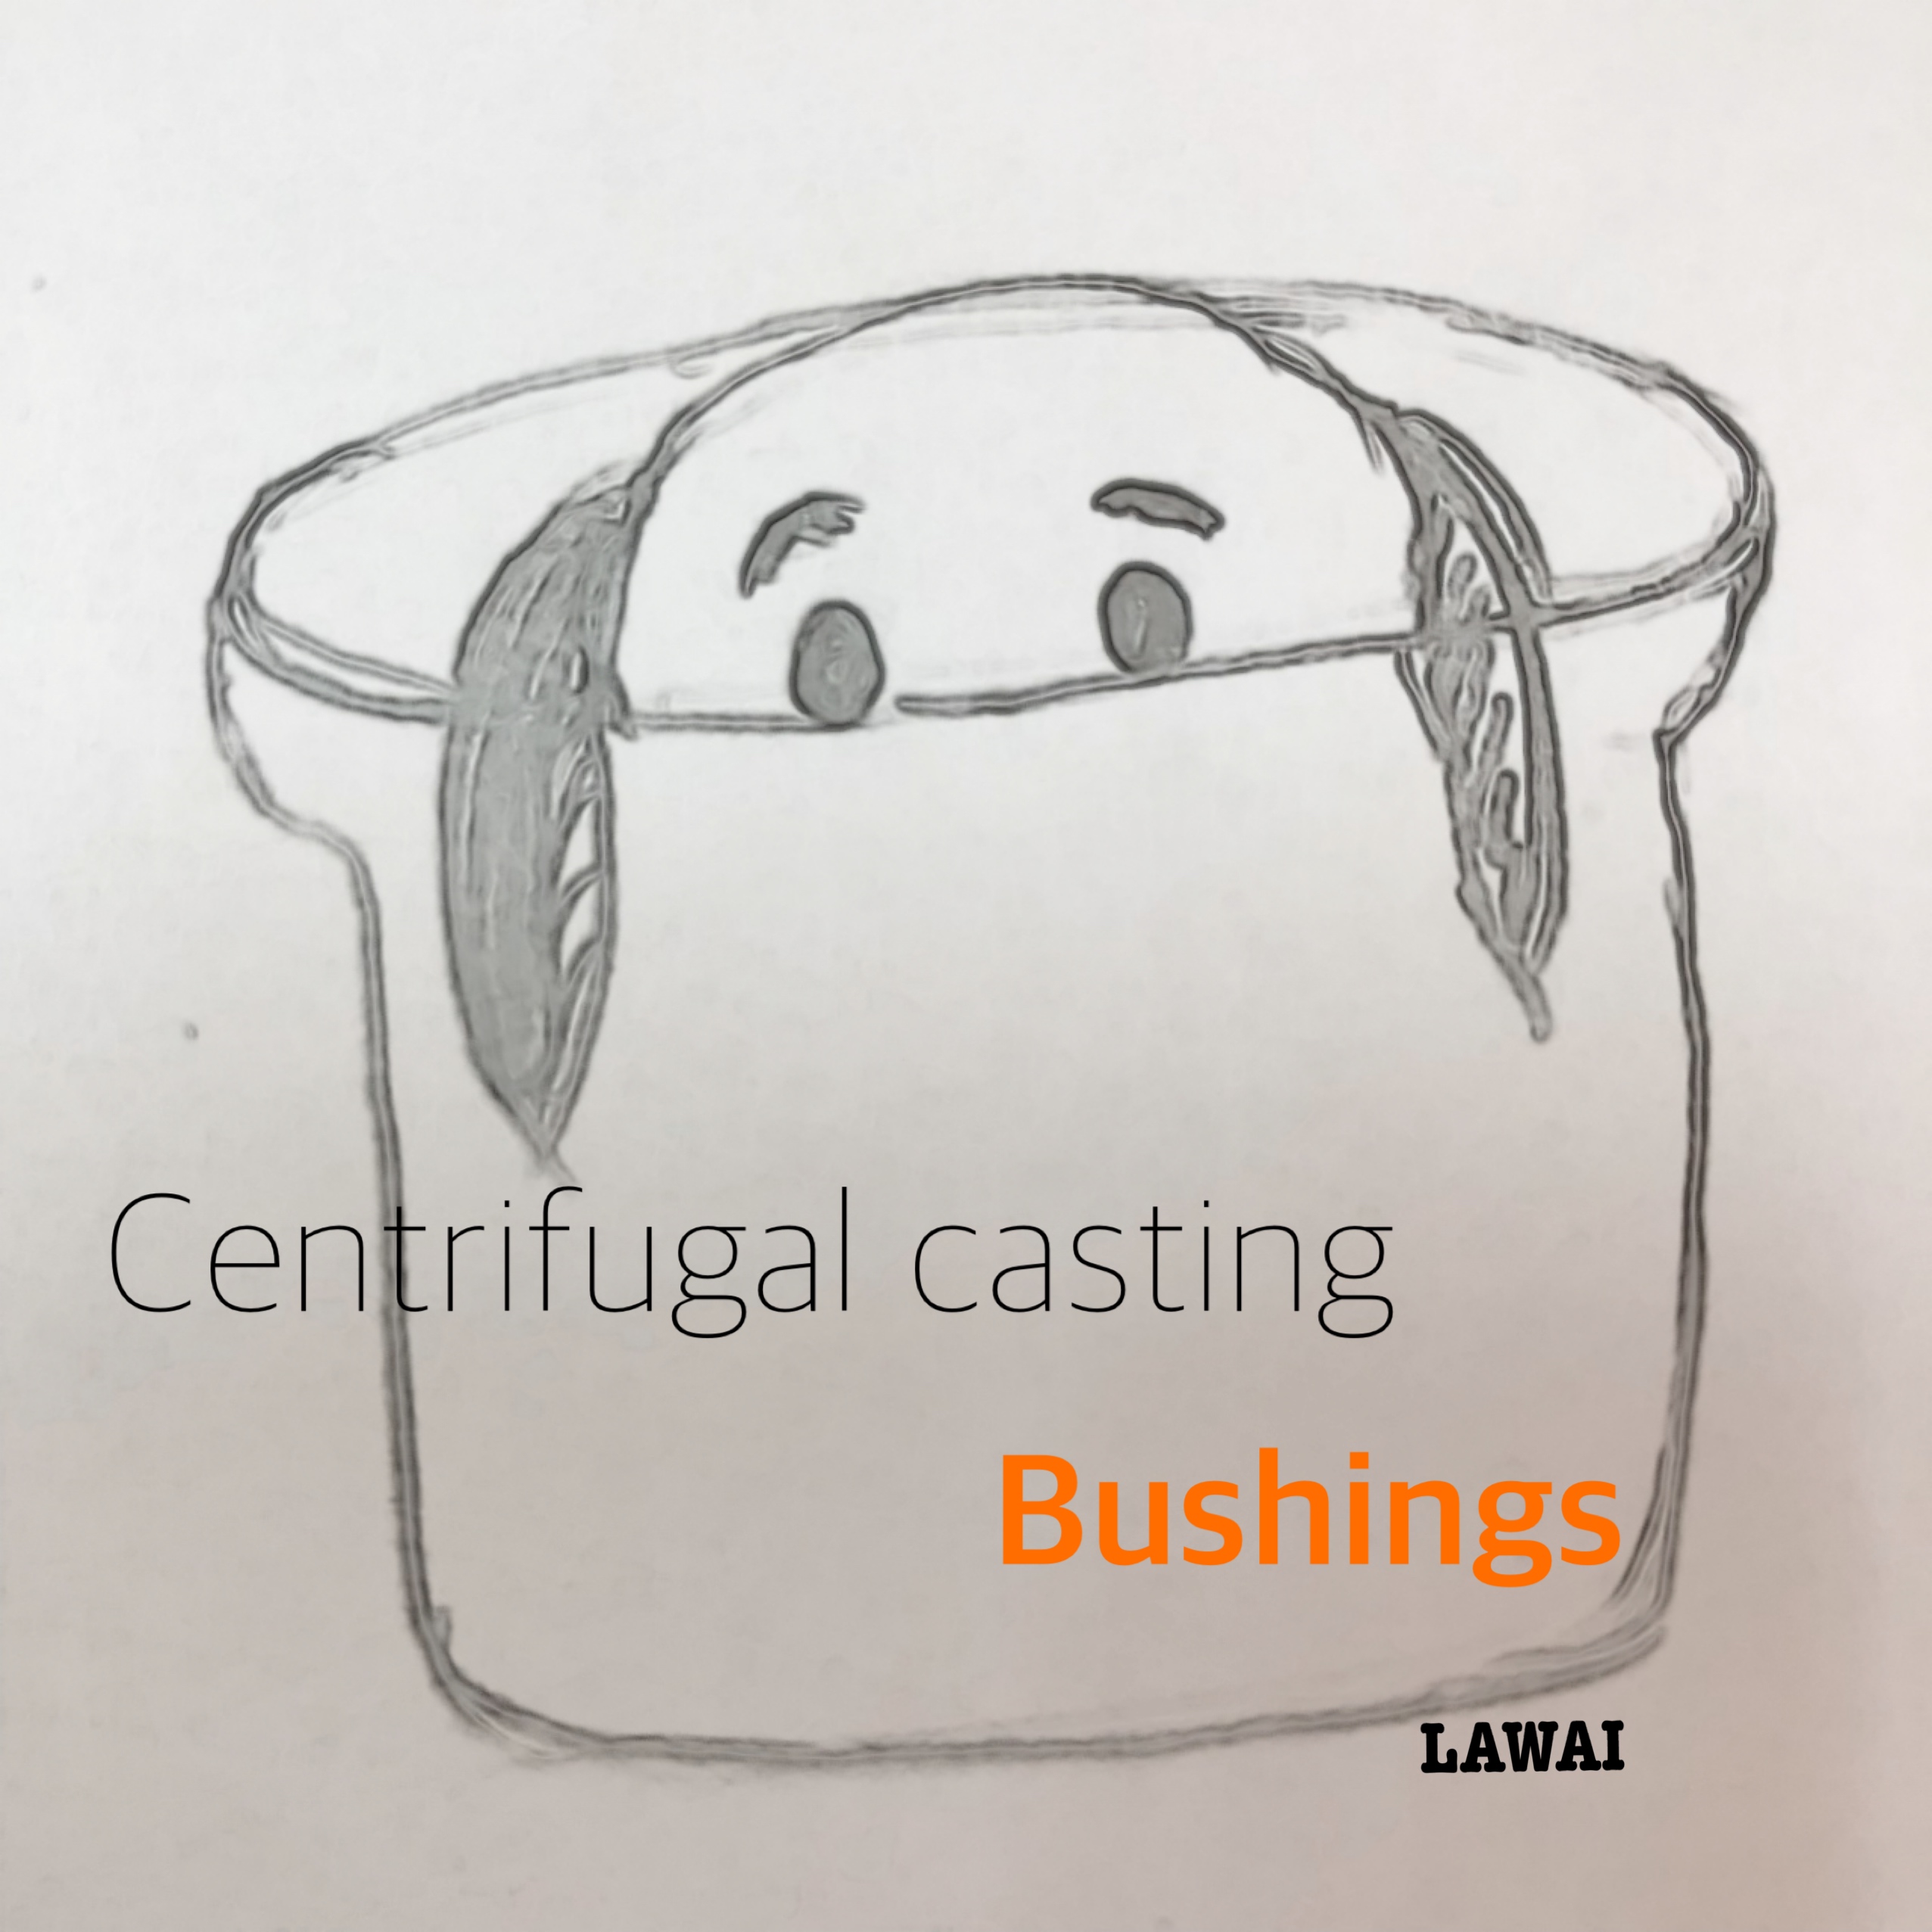 LAWAI INDUSTRIAL CORPORATION produces centrifugal casting bushings in Taiwan